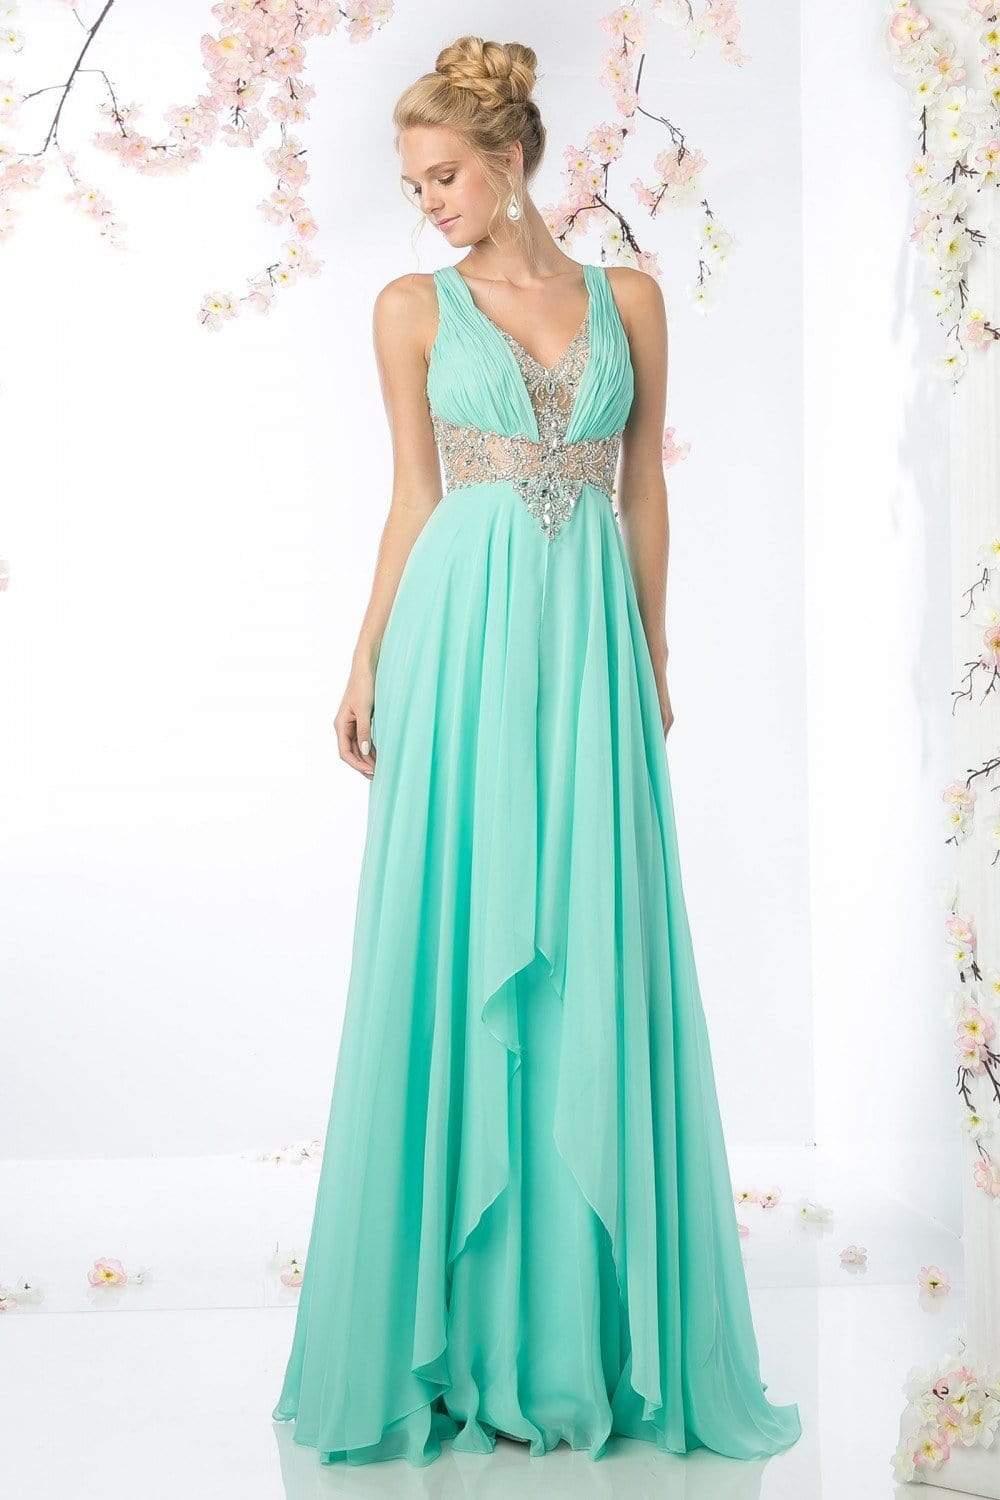 Cinderella Divine - Sleeveless Embellished Ruched A-line Dress Special Occasion Dress 2 / Mint